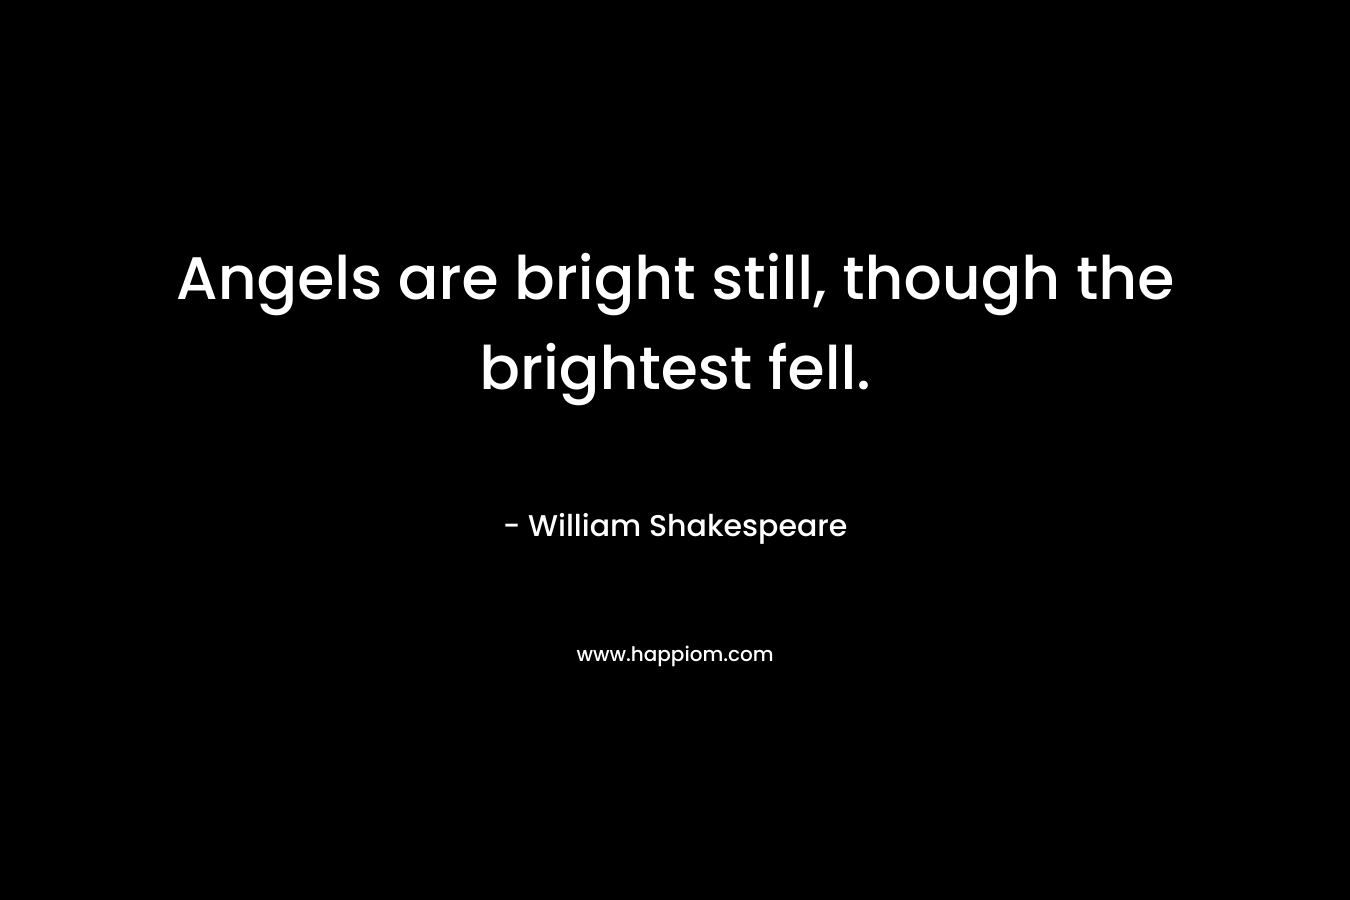 Angels are bright still, though the brightest fell. – William Shakespeare